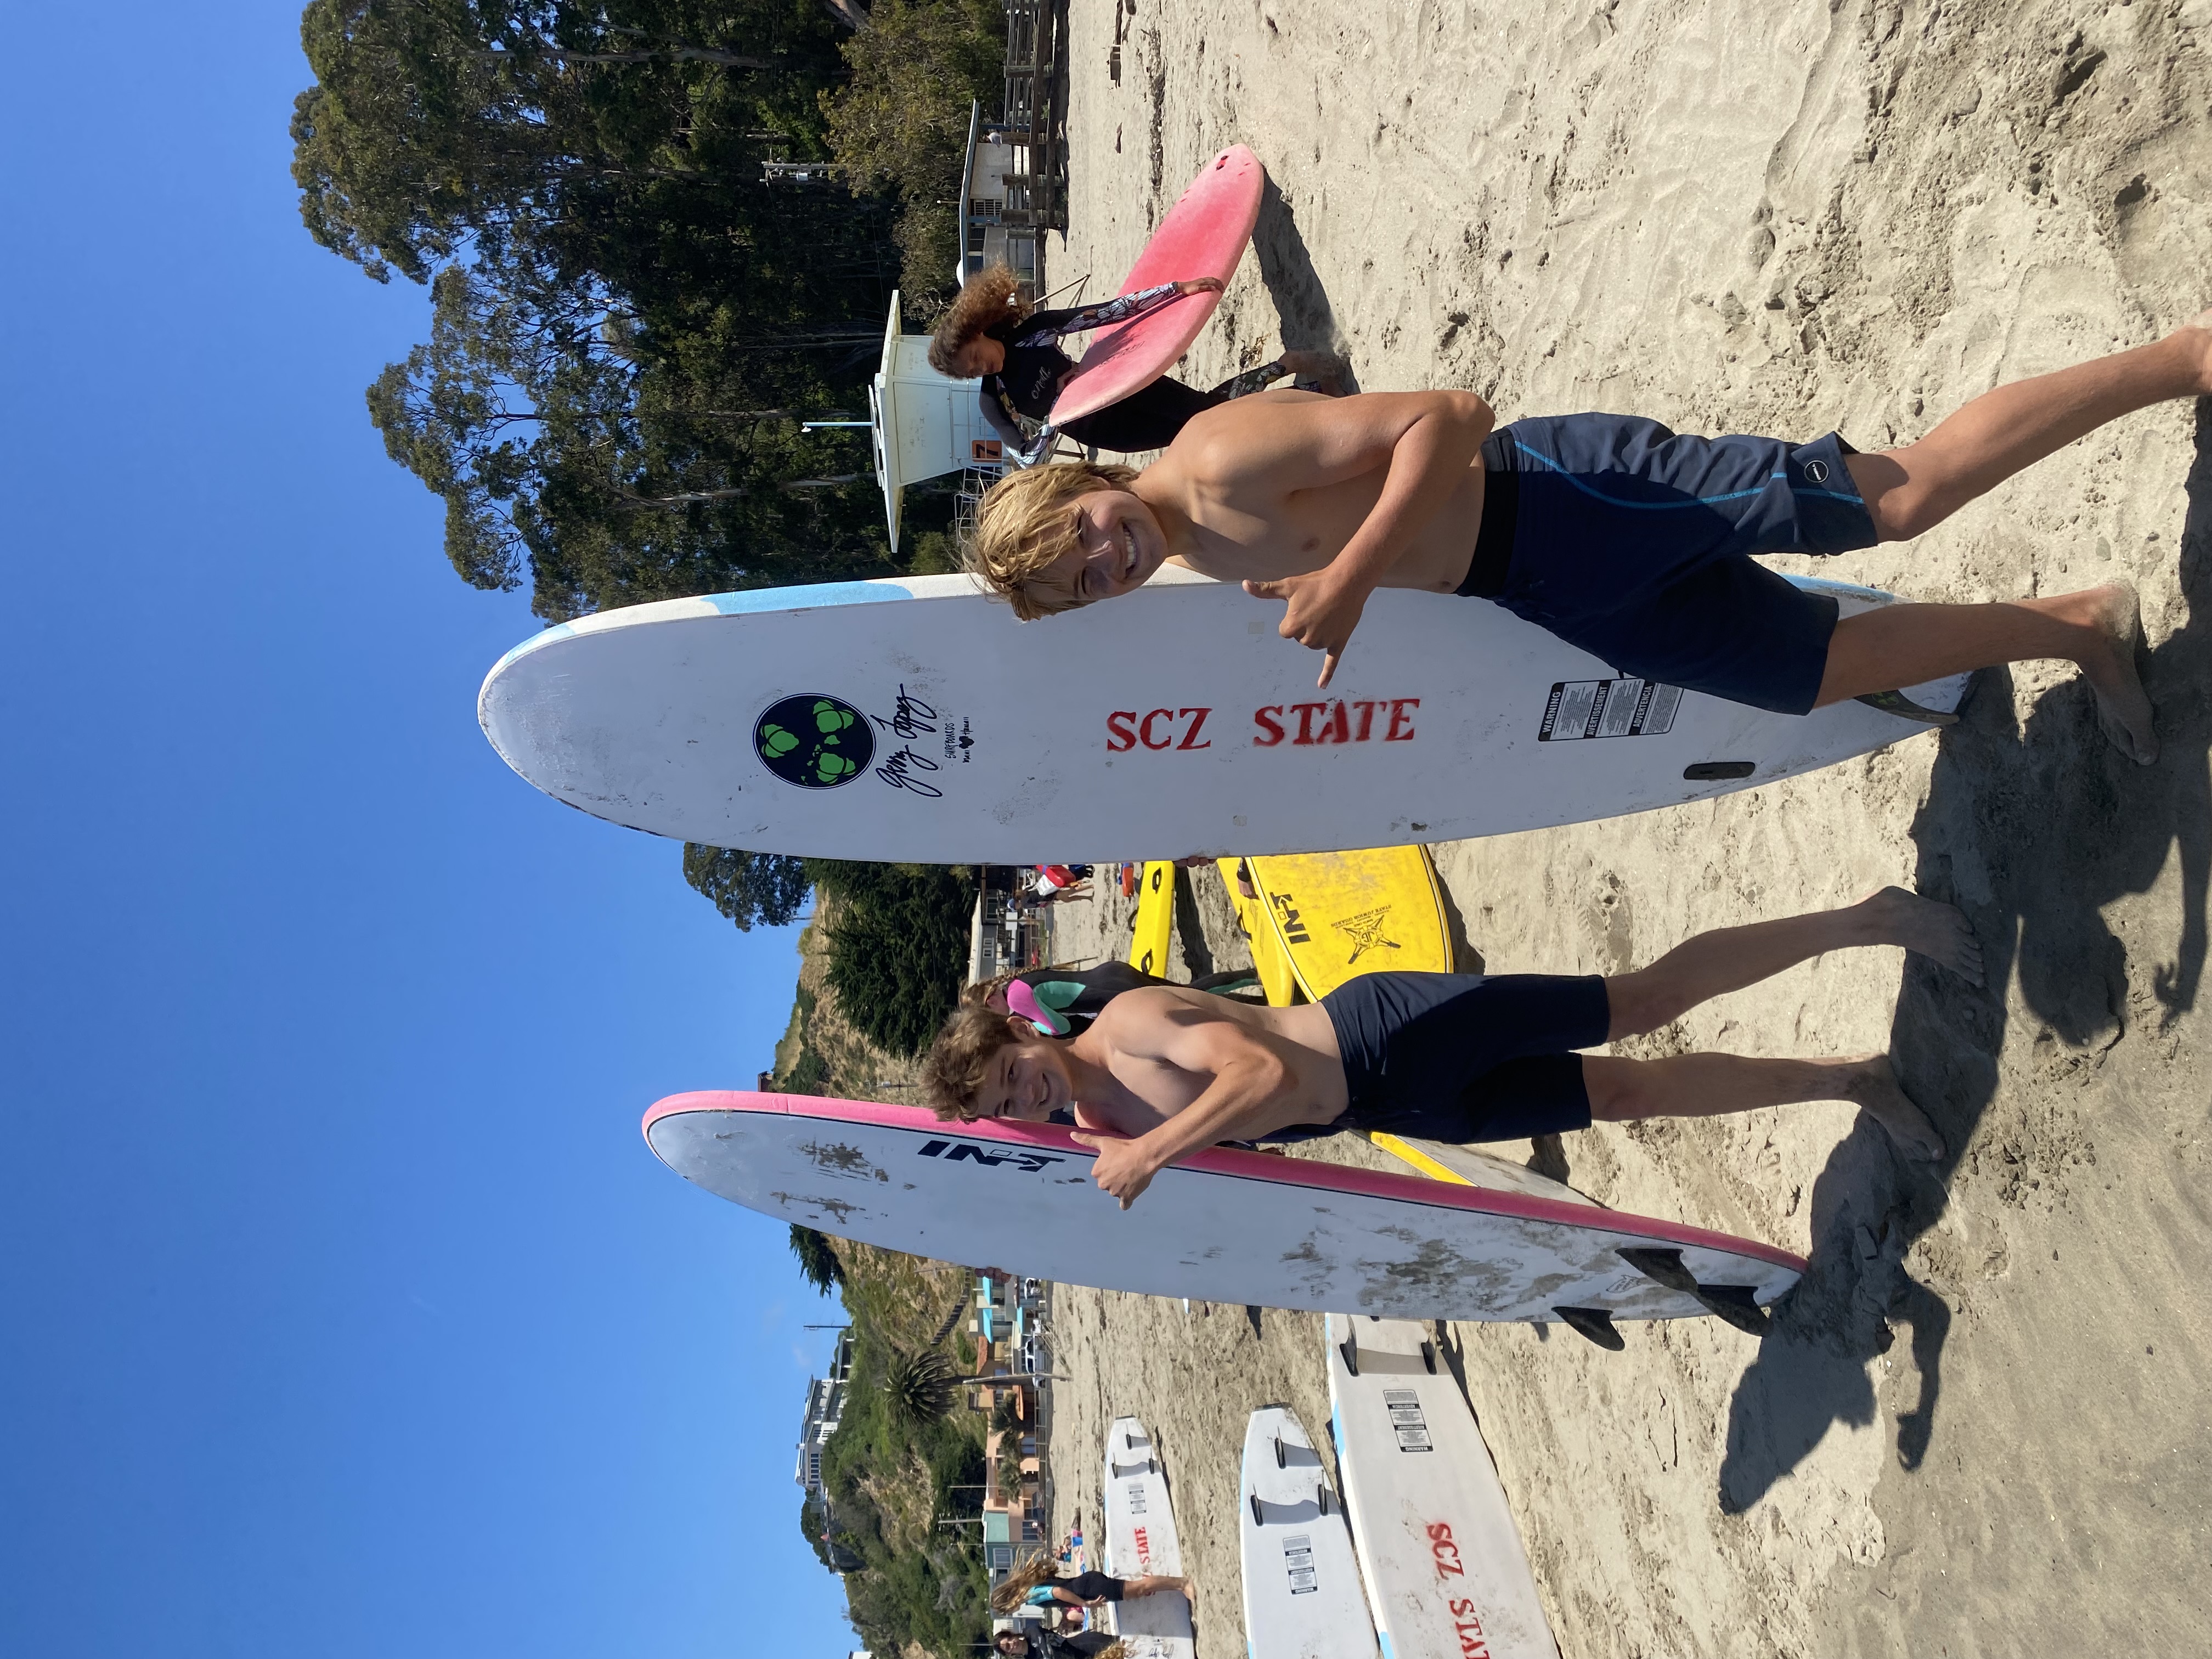 Participants with Surf Boards